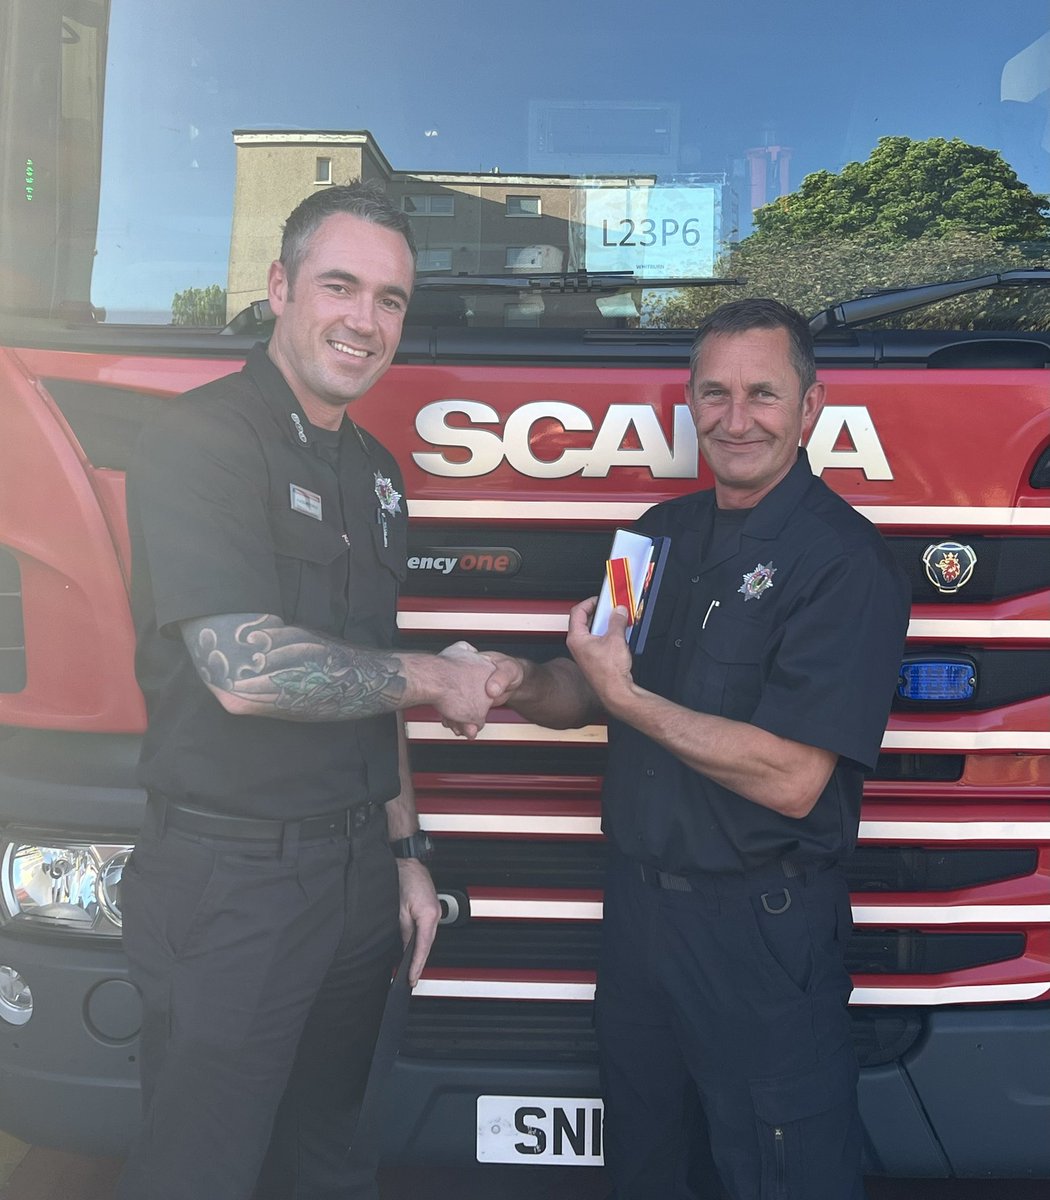 Congratulations to FF Nick Mullen at Whitburn Fire Station for a dedicated 20 years service protecting the local community , here we have SC Fowlie presenting FF Mullen with his Long Service Good Conduct award, outstanding achievement to a very respected FF.